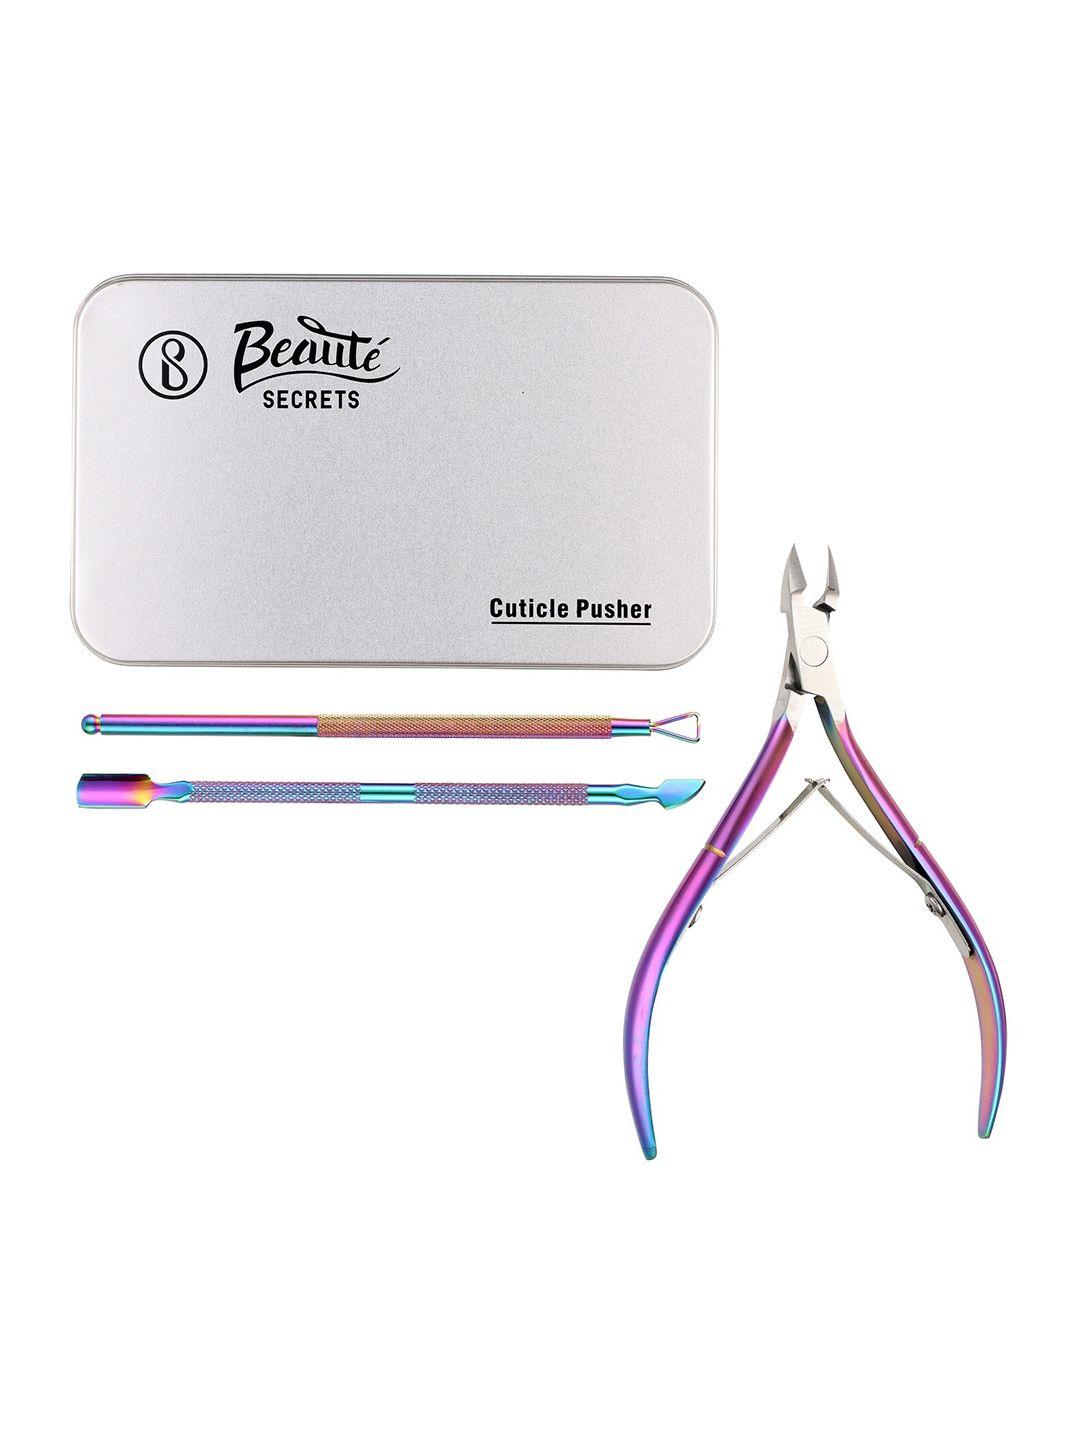 beaute secrets tools for perfect manicures and pedicures